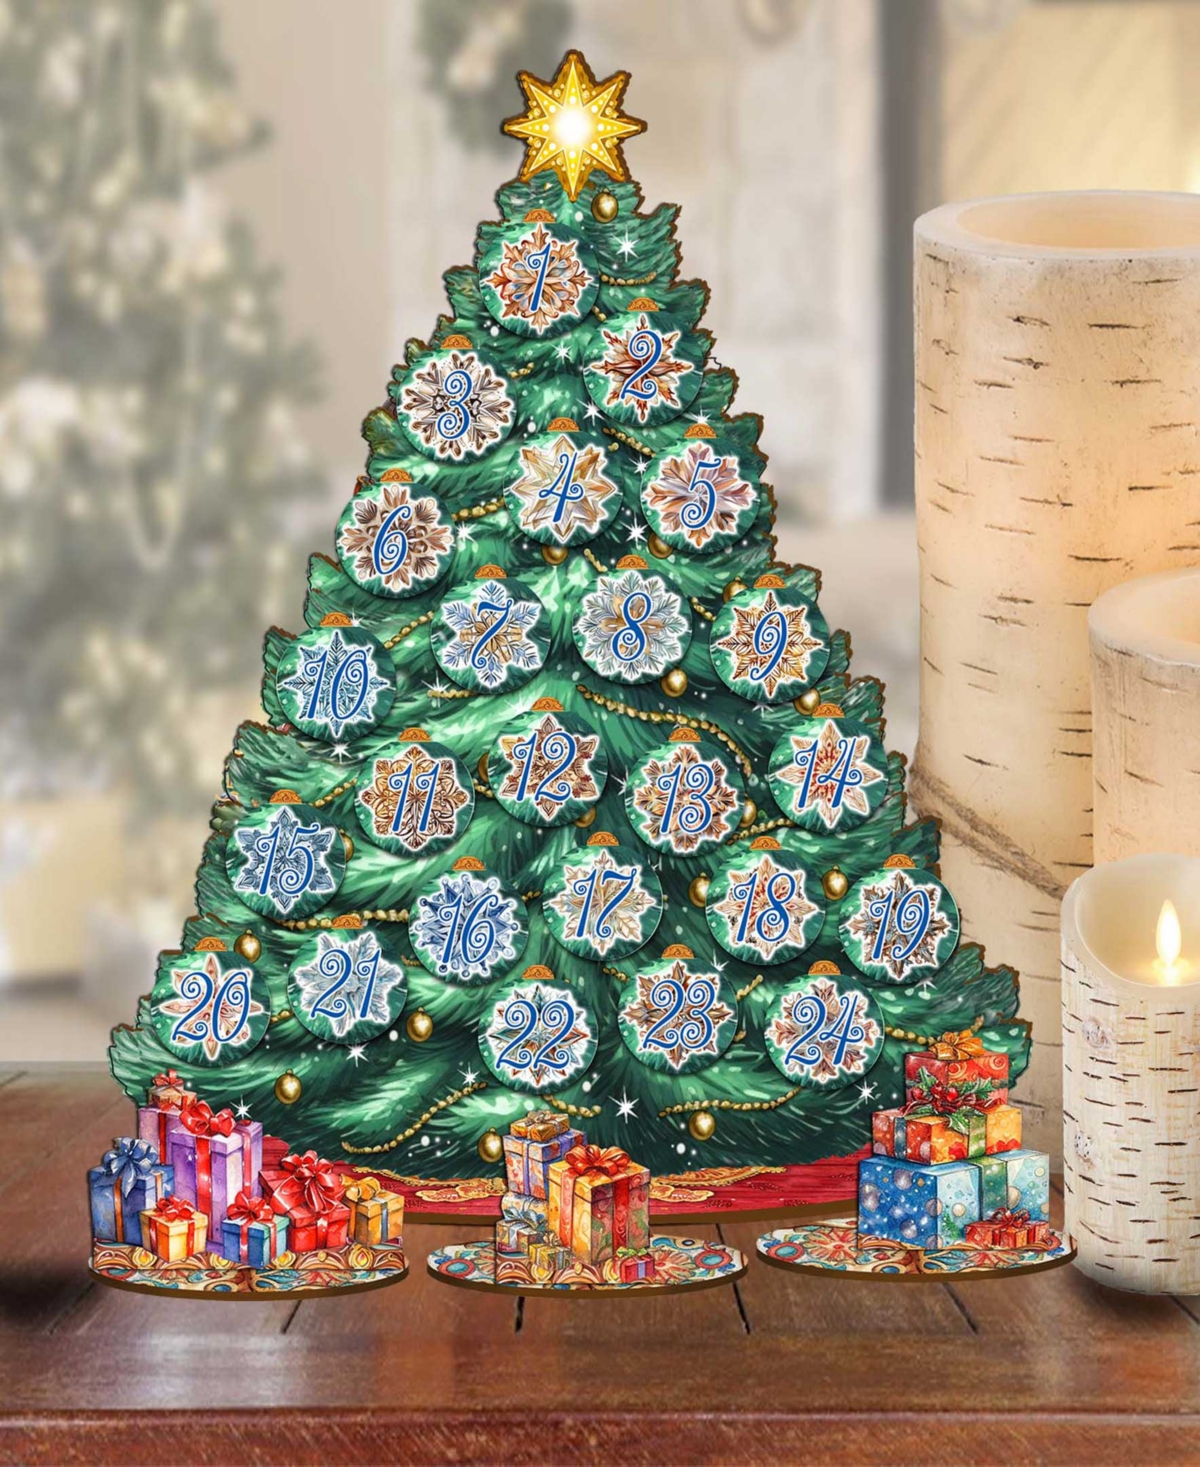 Designocracy Advent Calendar Themed Wooden Christmas Tree With Ornaments Set Of 28 G. Debrekht In Green